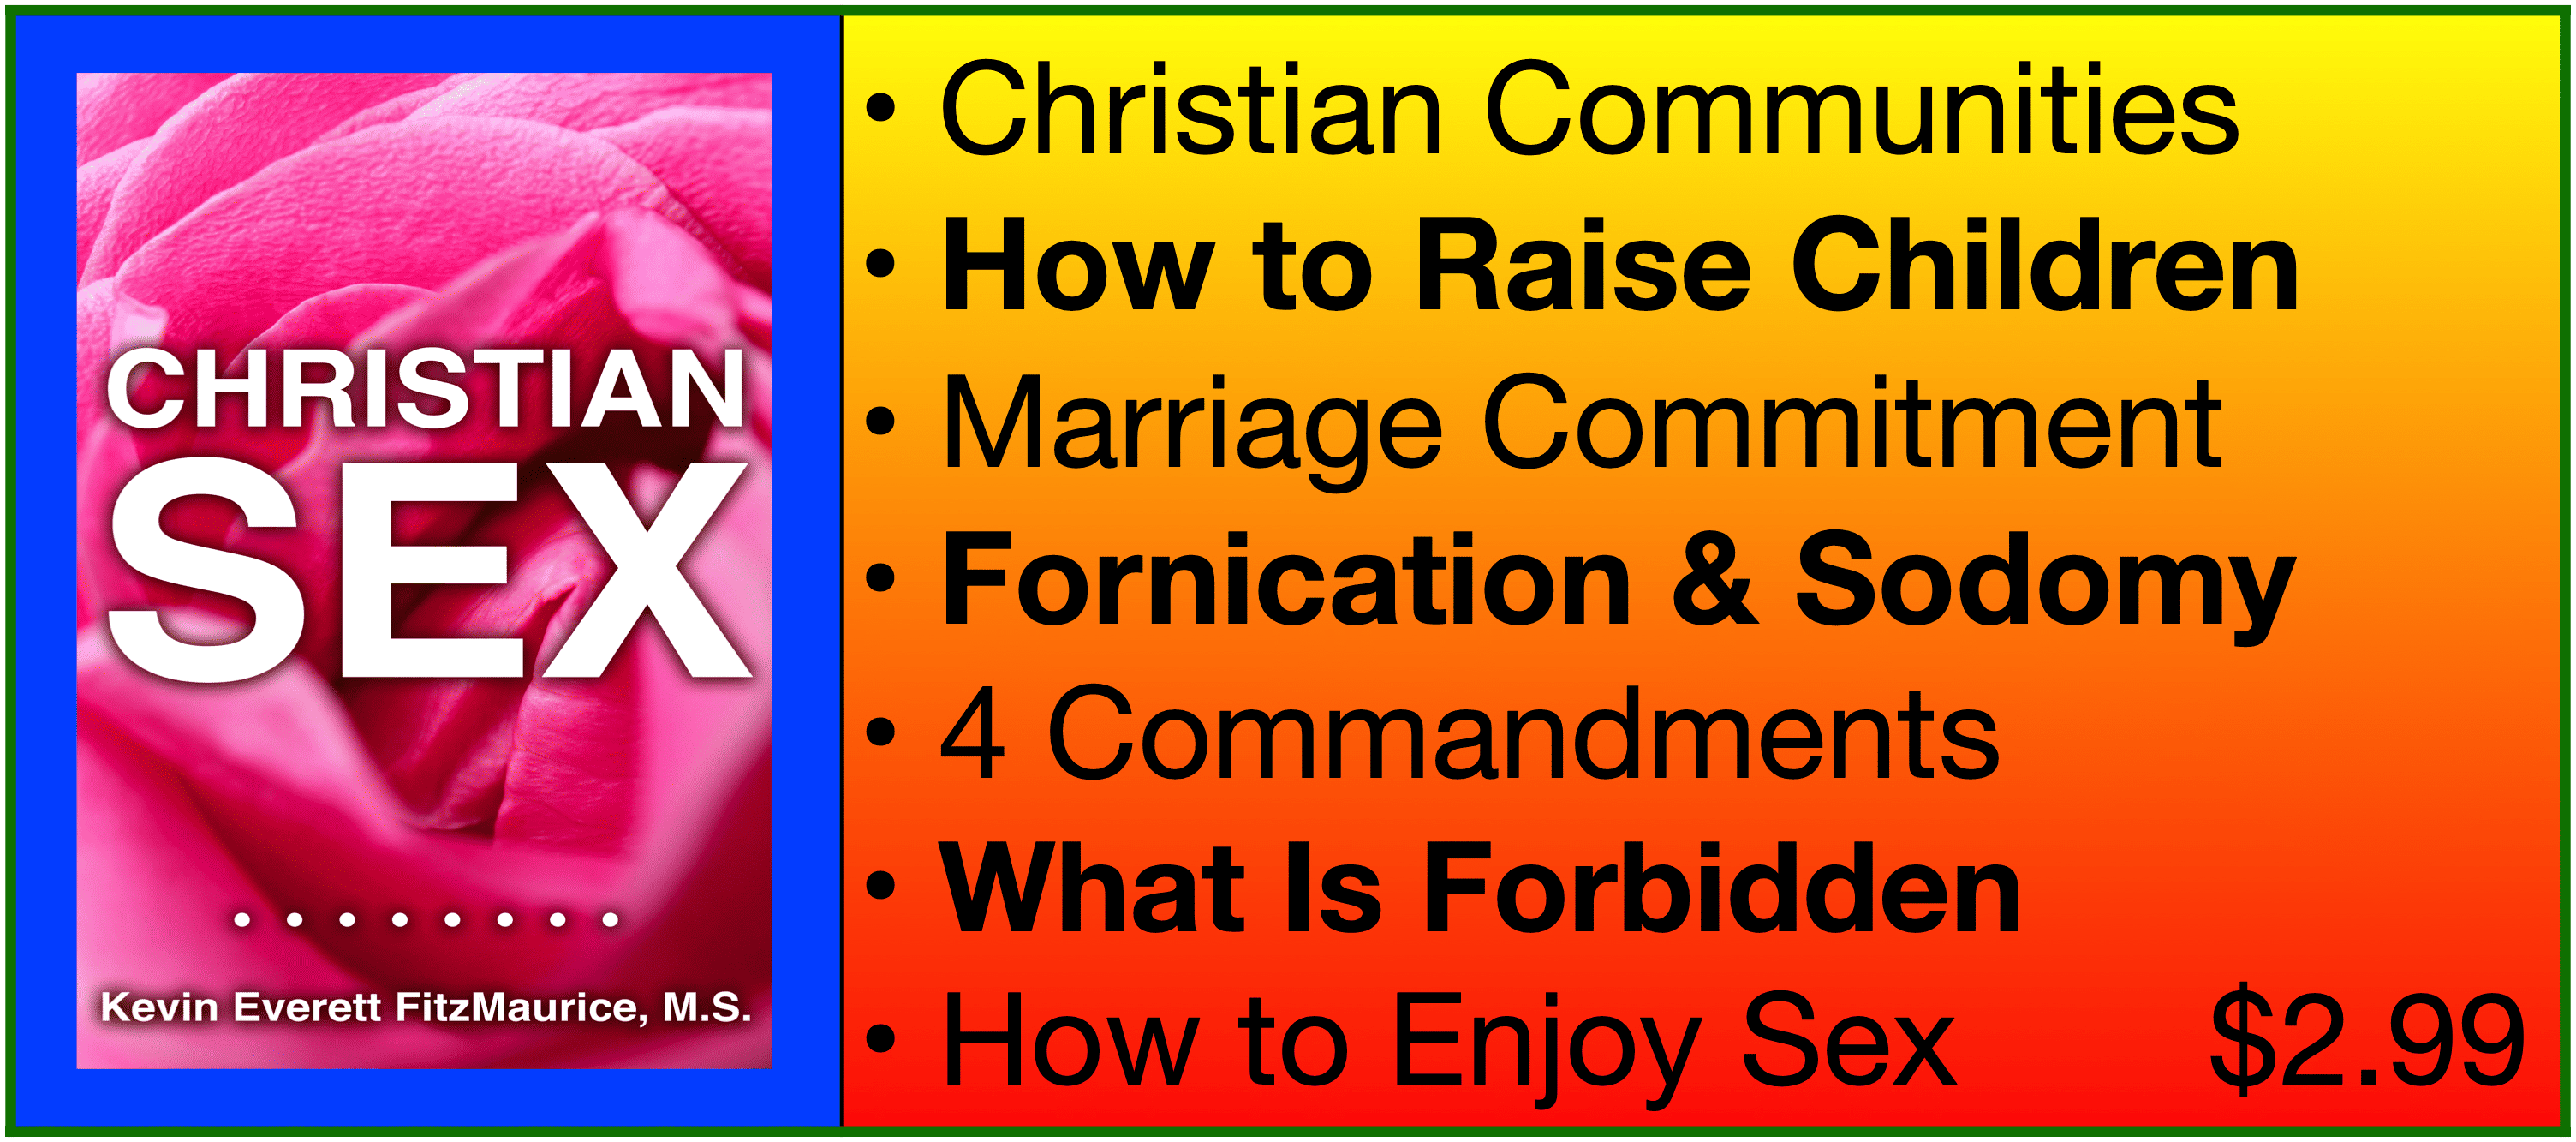 Christian Sex and what you can and can't do